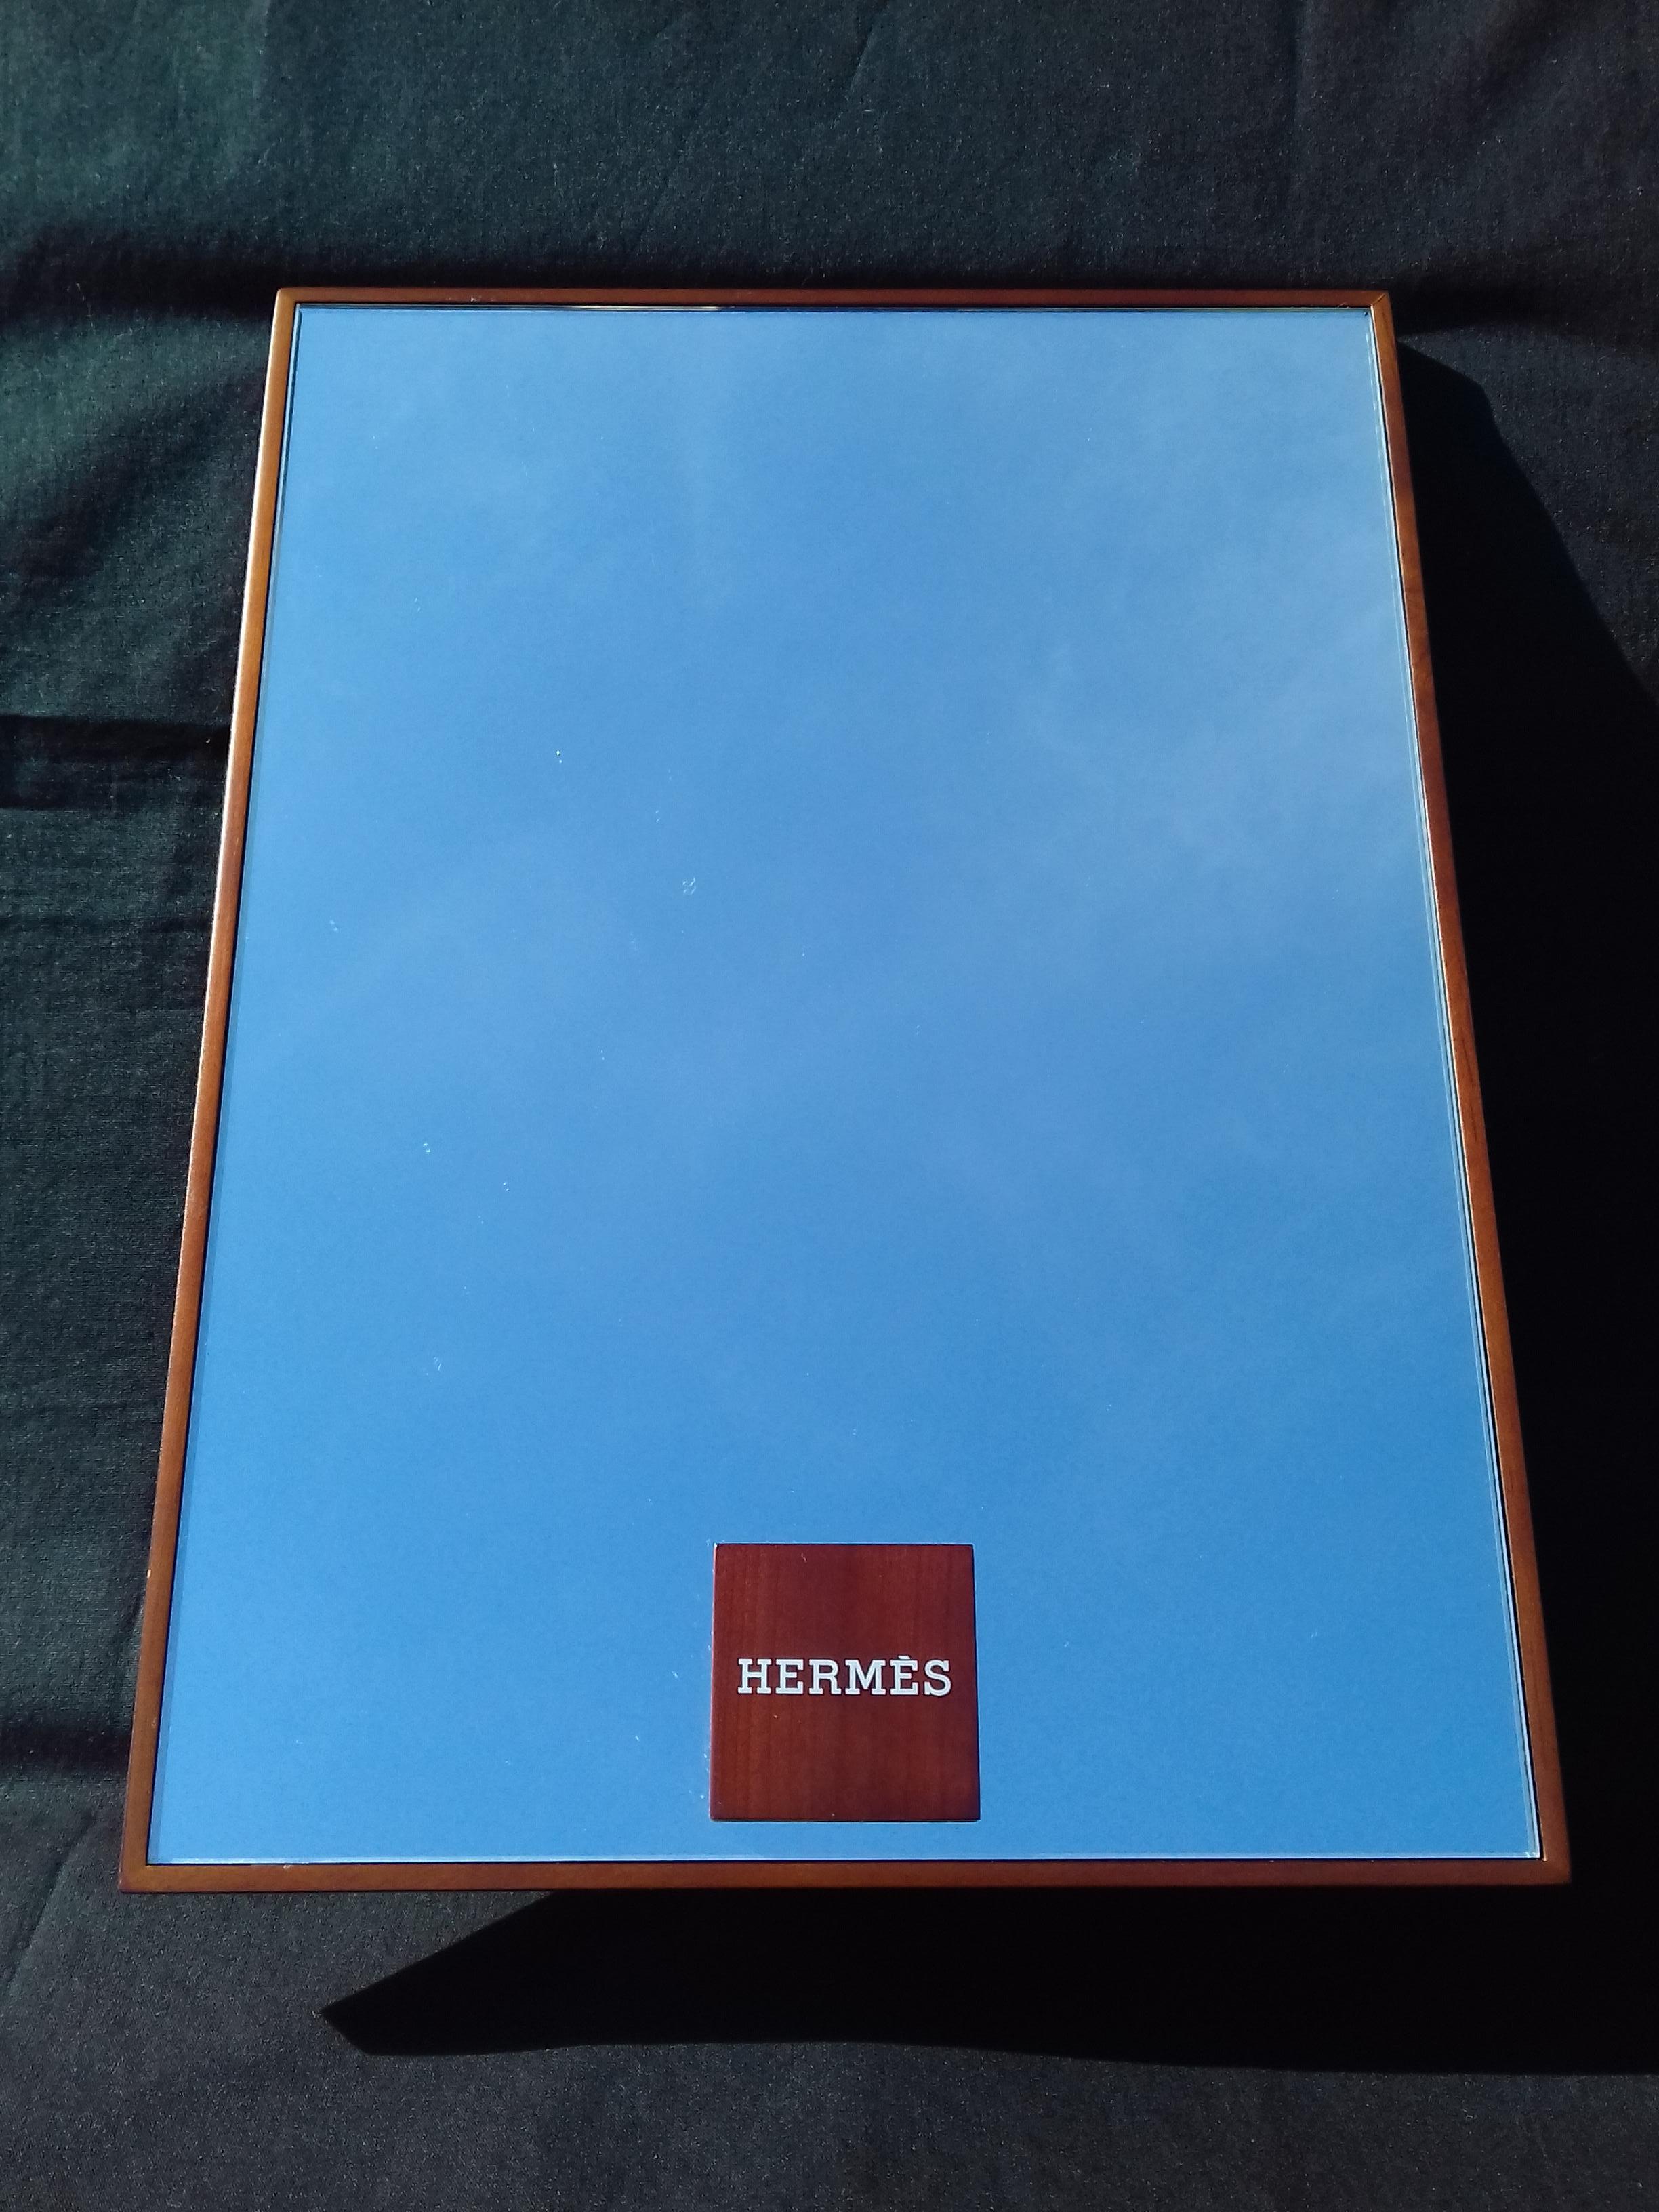 Authentic Hermès Mirror

The mirror is surrounded by a wooden frame

The base is a rectangle of wood

